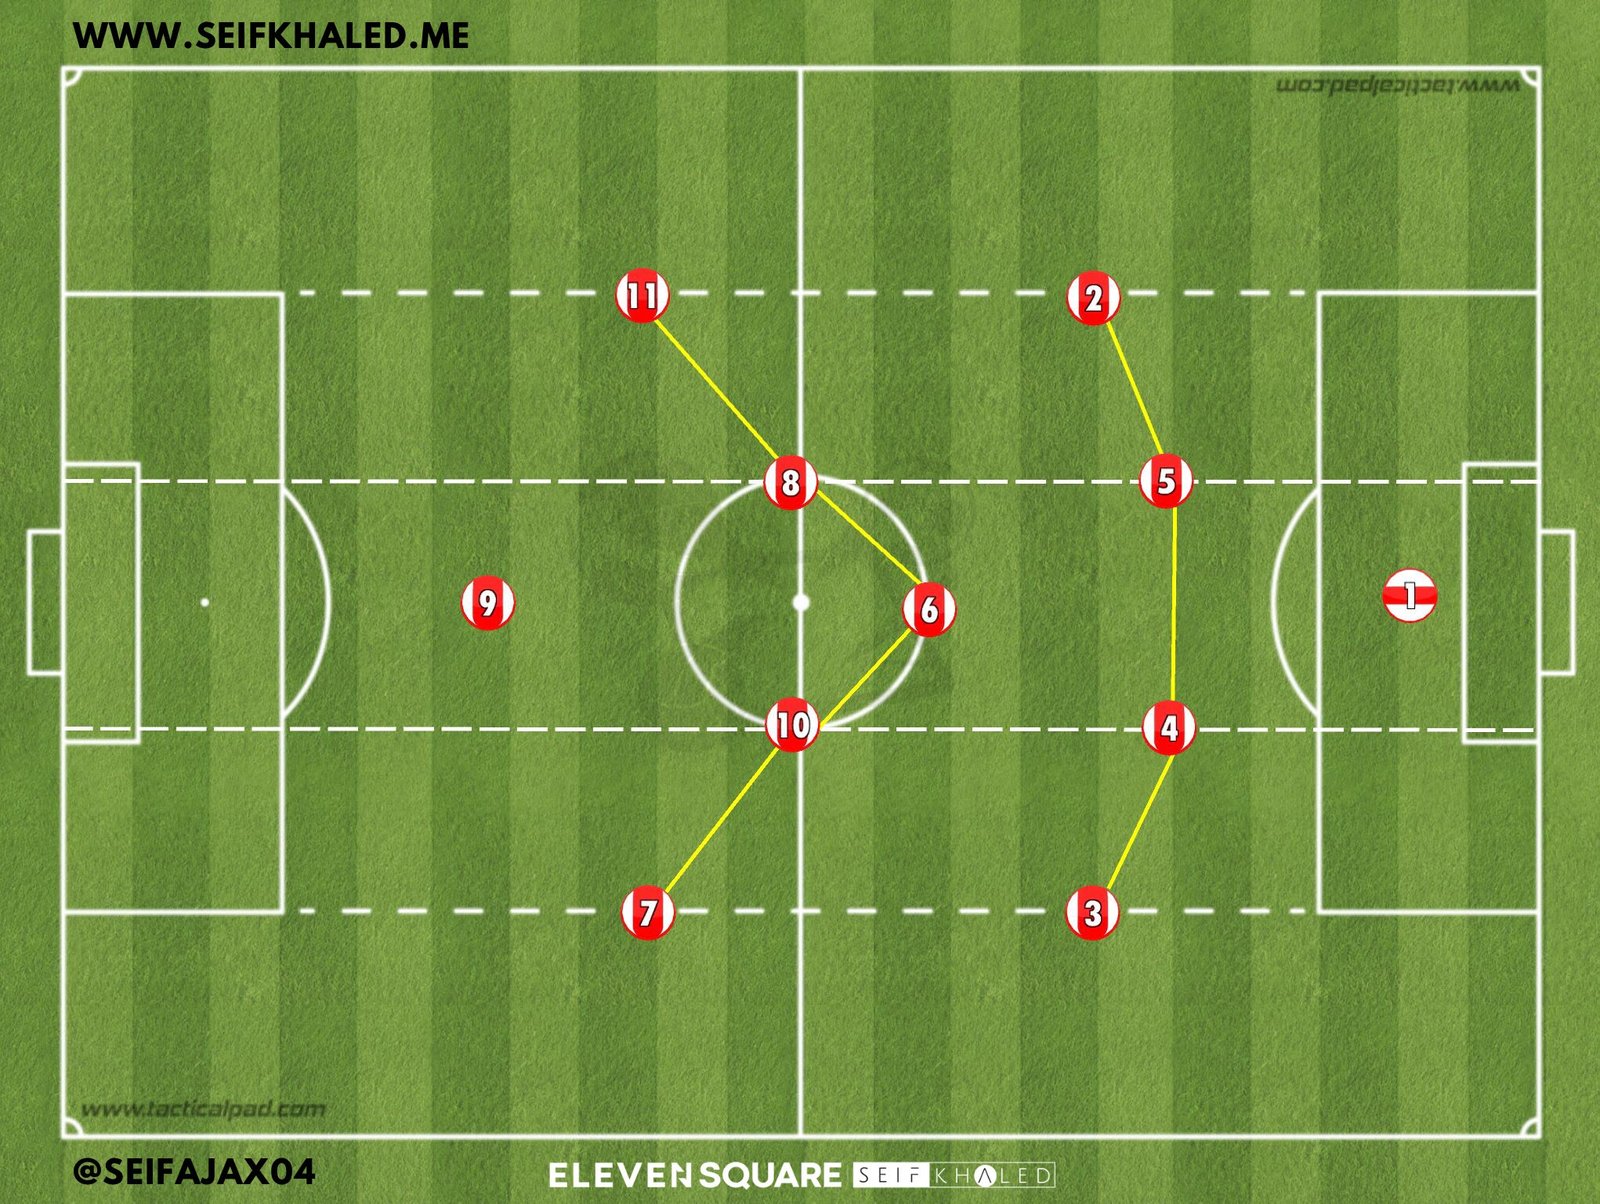 4-3-3 FORMATION OUT POSSESSION SHAPE 4-1-4-1